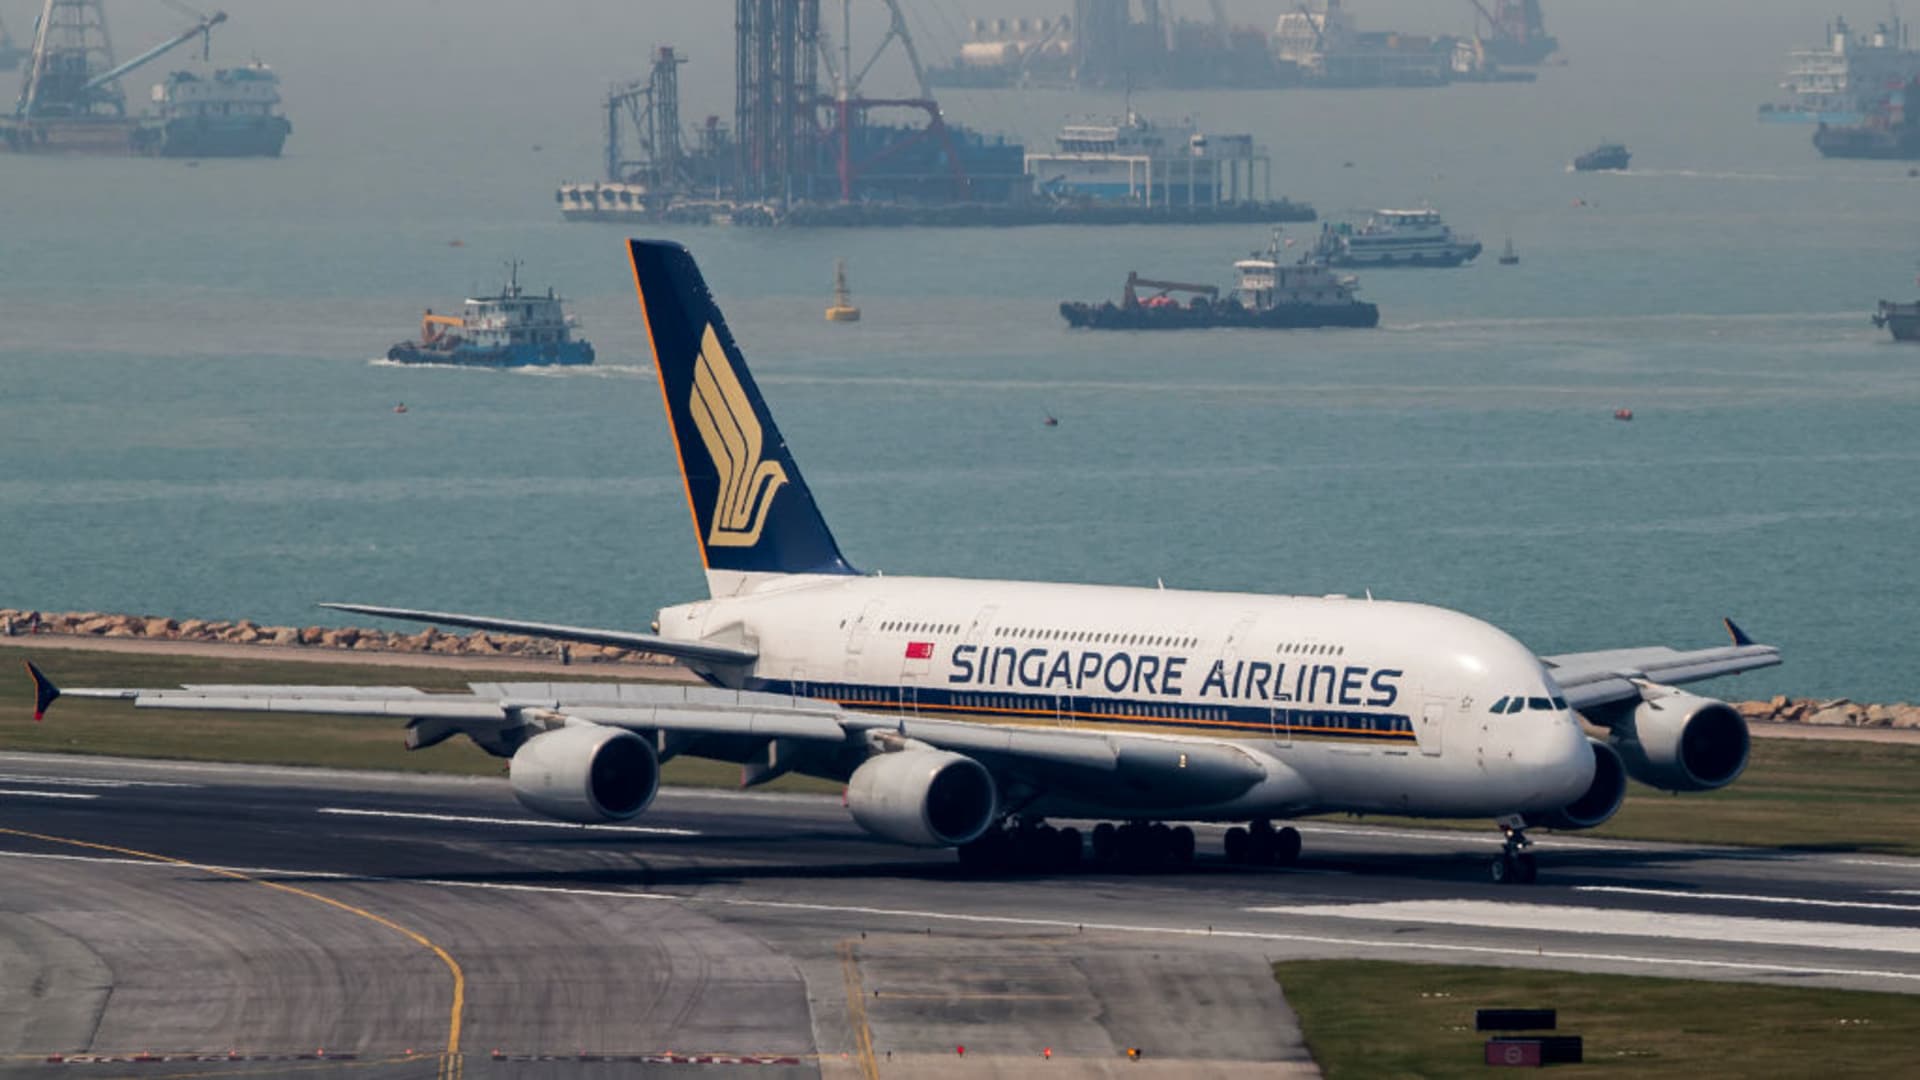 Singapore outbound flights to cost more from 2026 over green fuel requirements